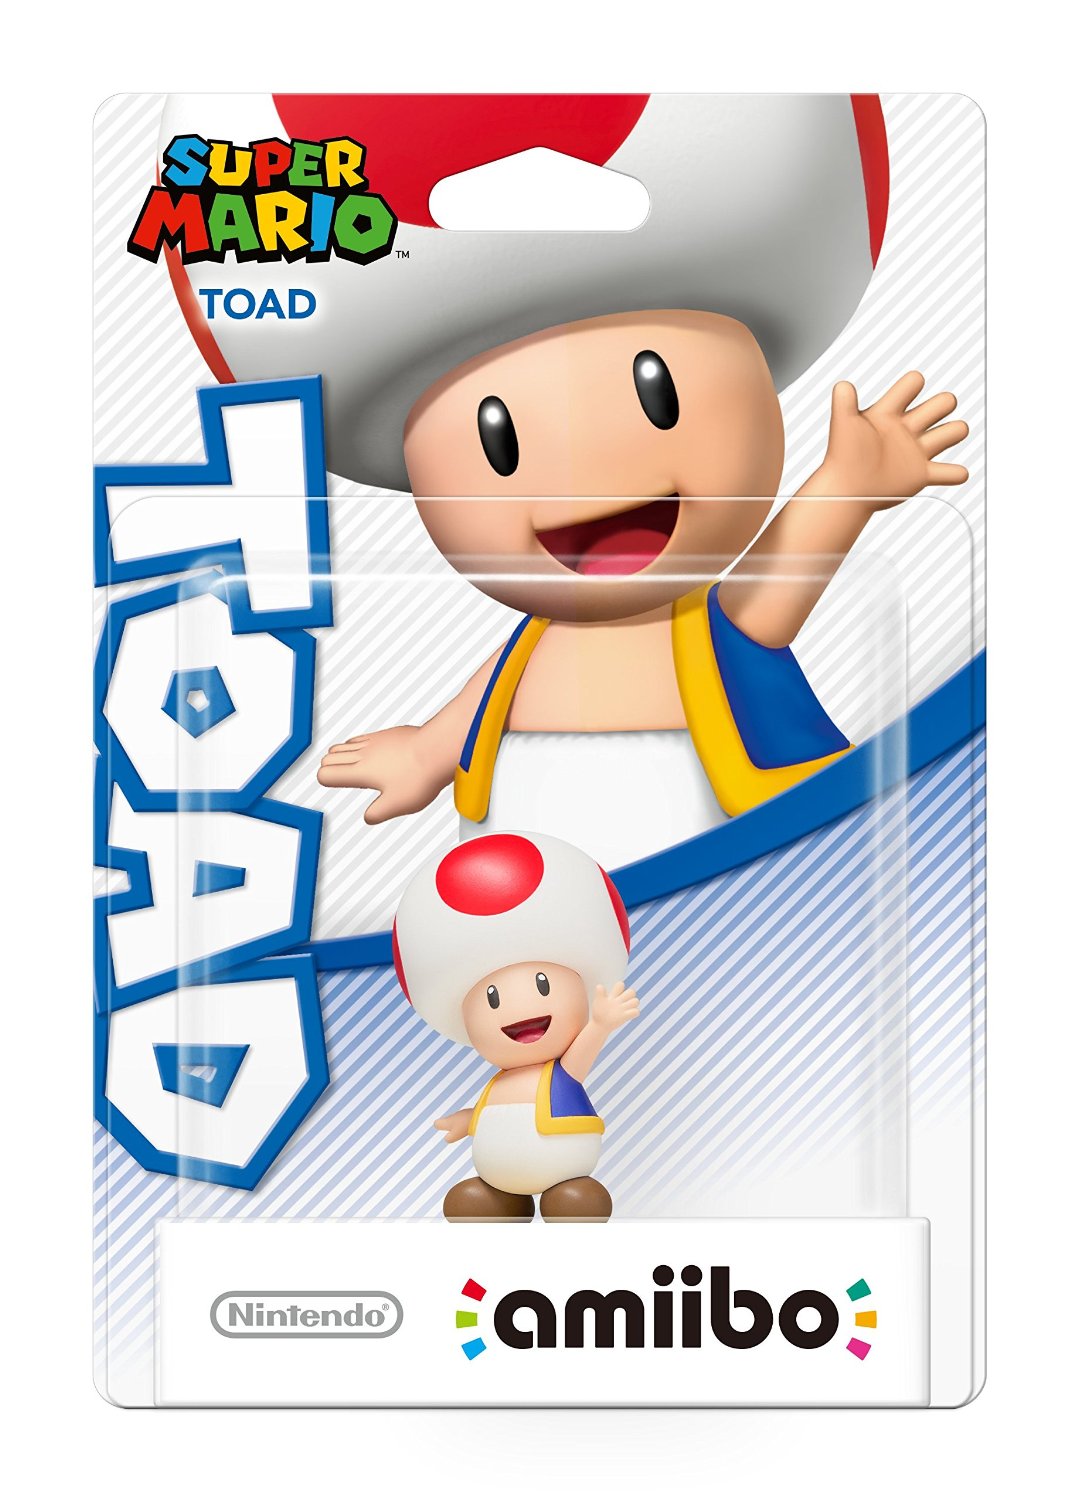 Captain Toad - Treasure Tracker: amiibo update now available in 